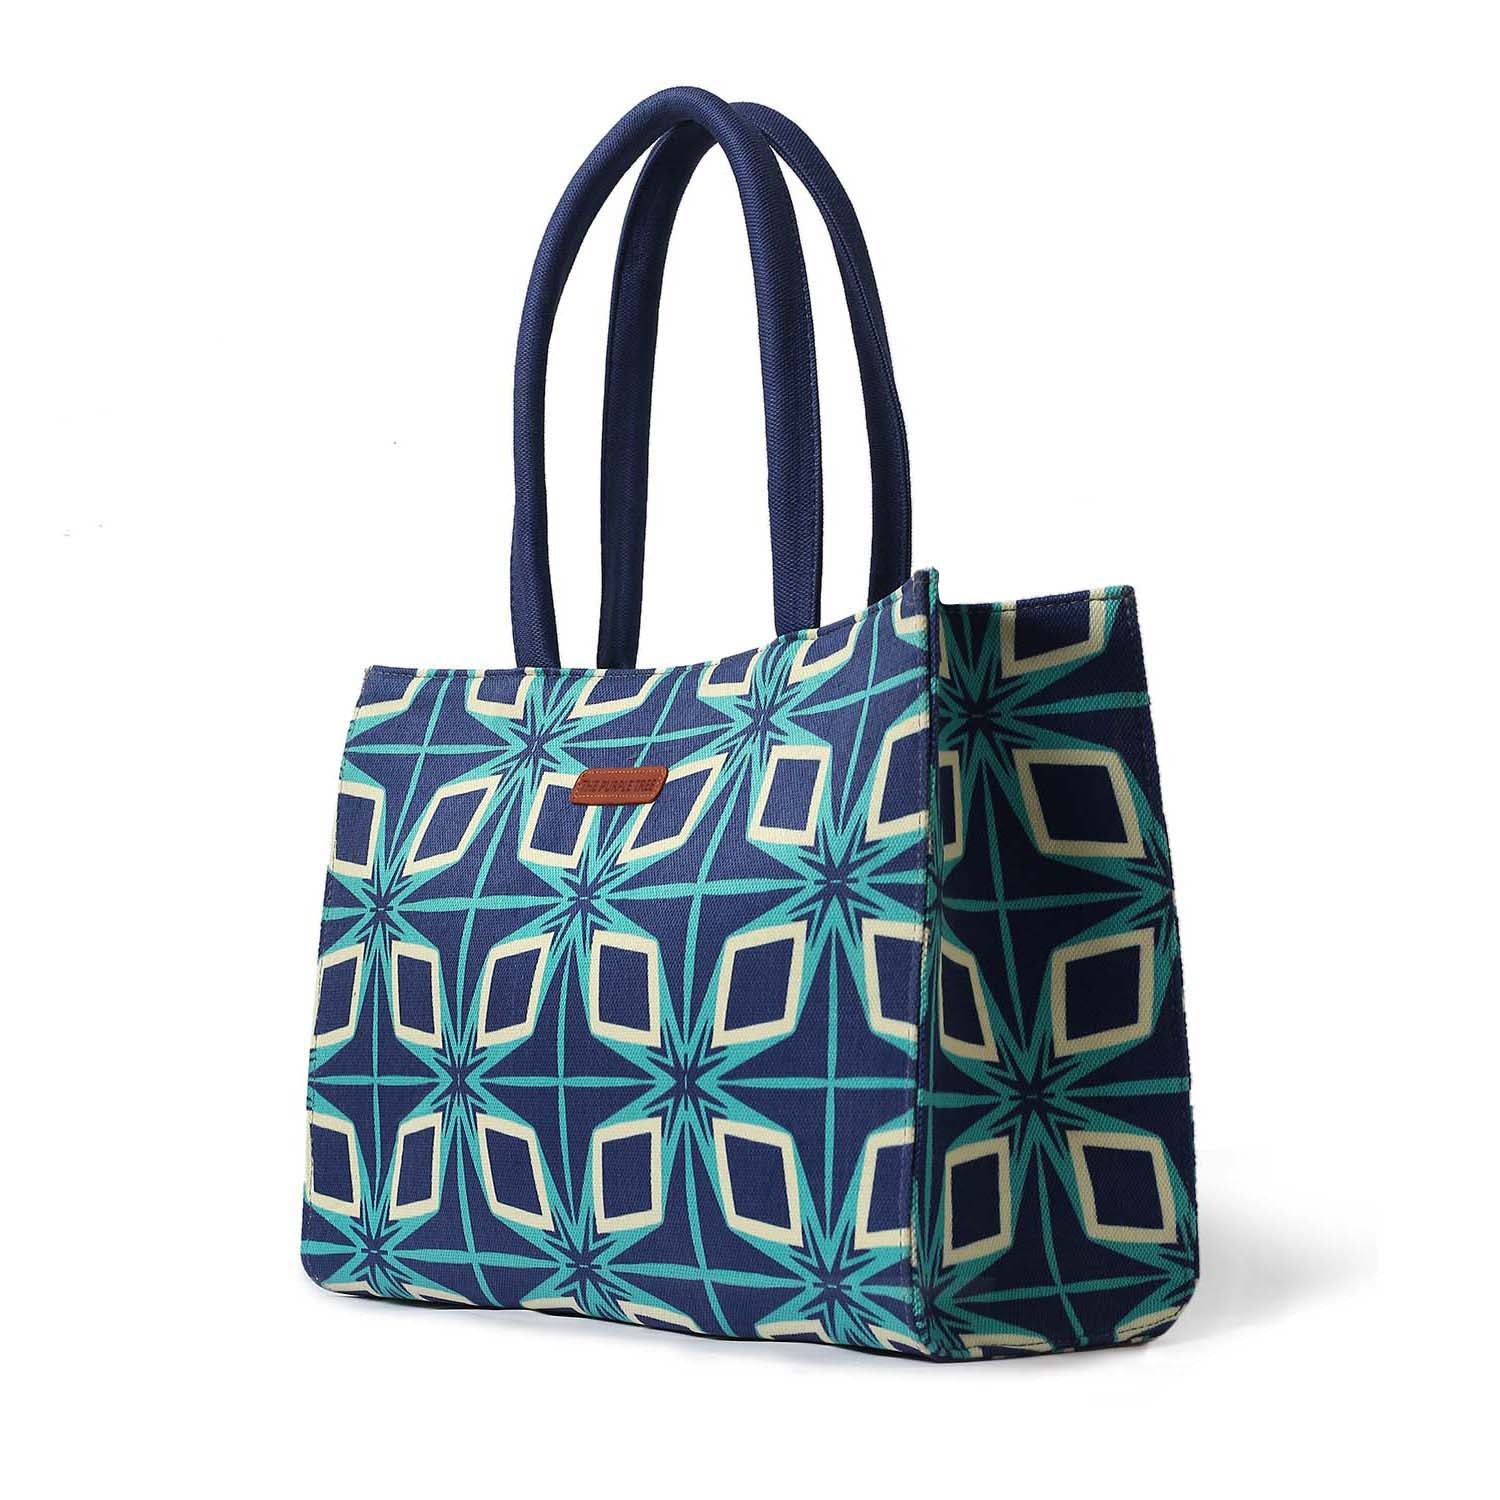 Chic tote bag in blue and green pattern with book and sunglasses.